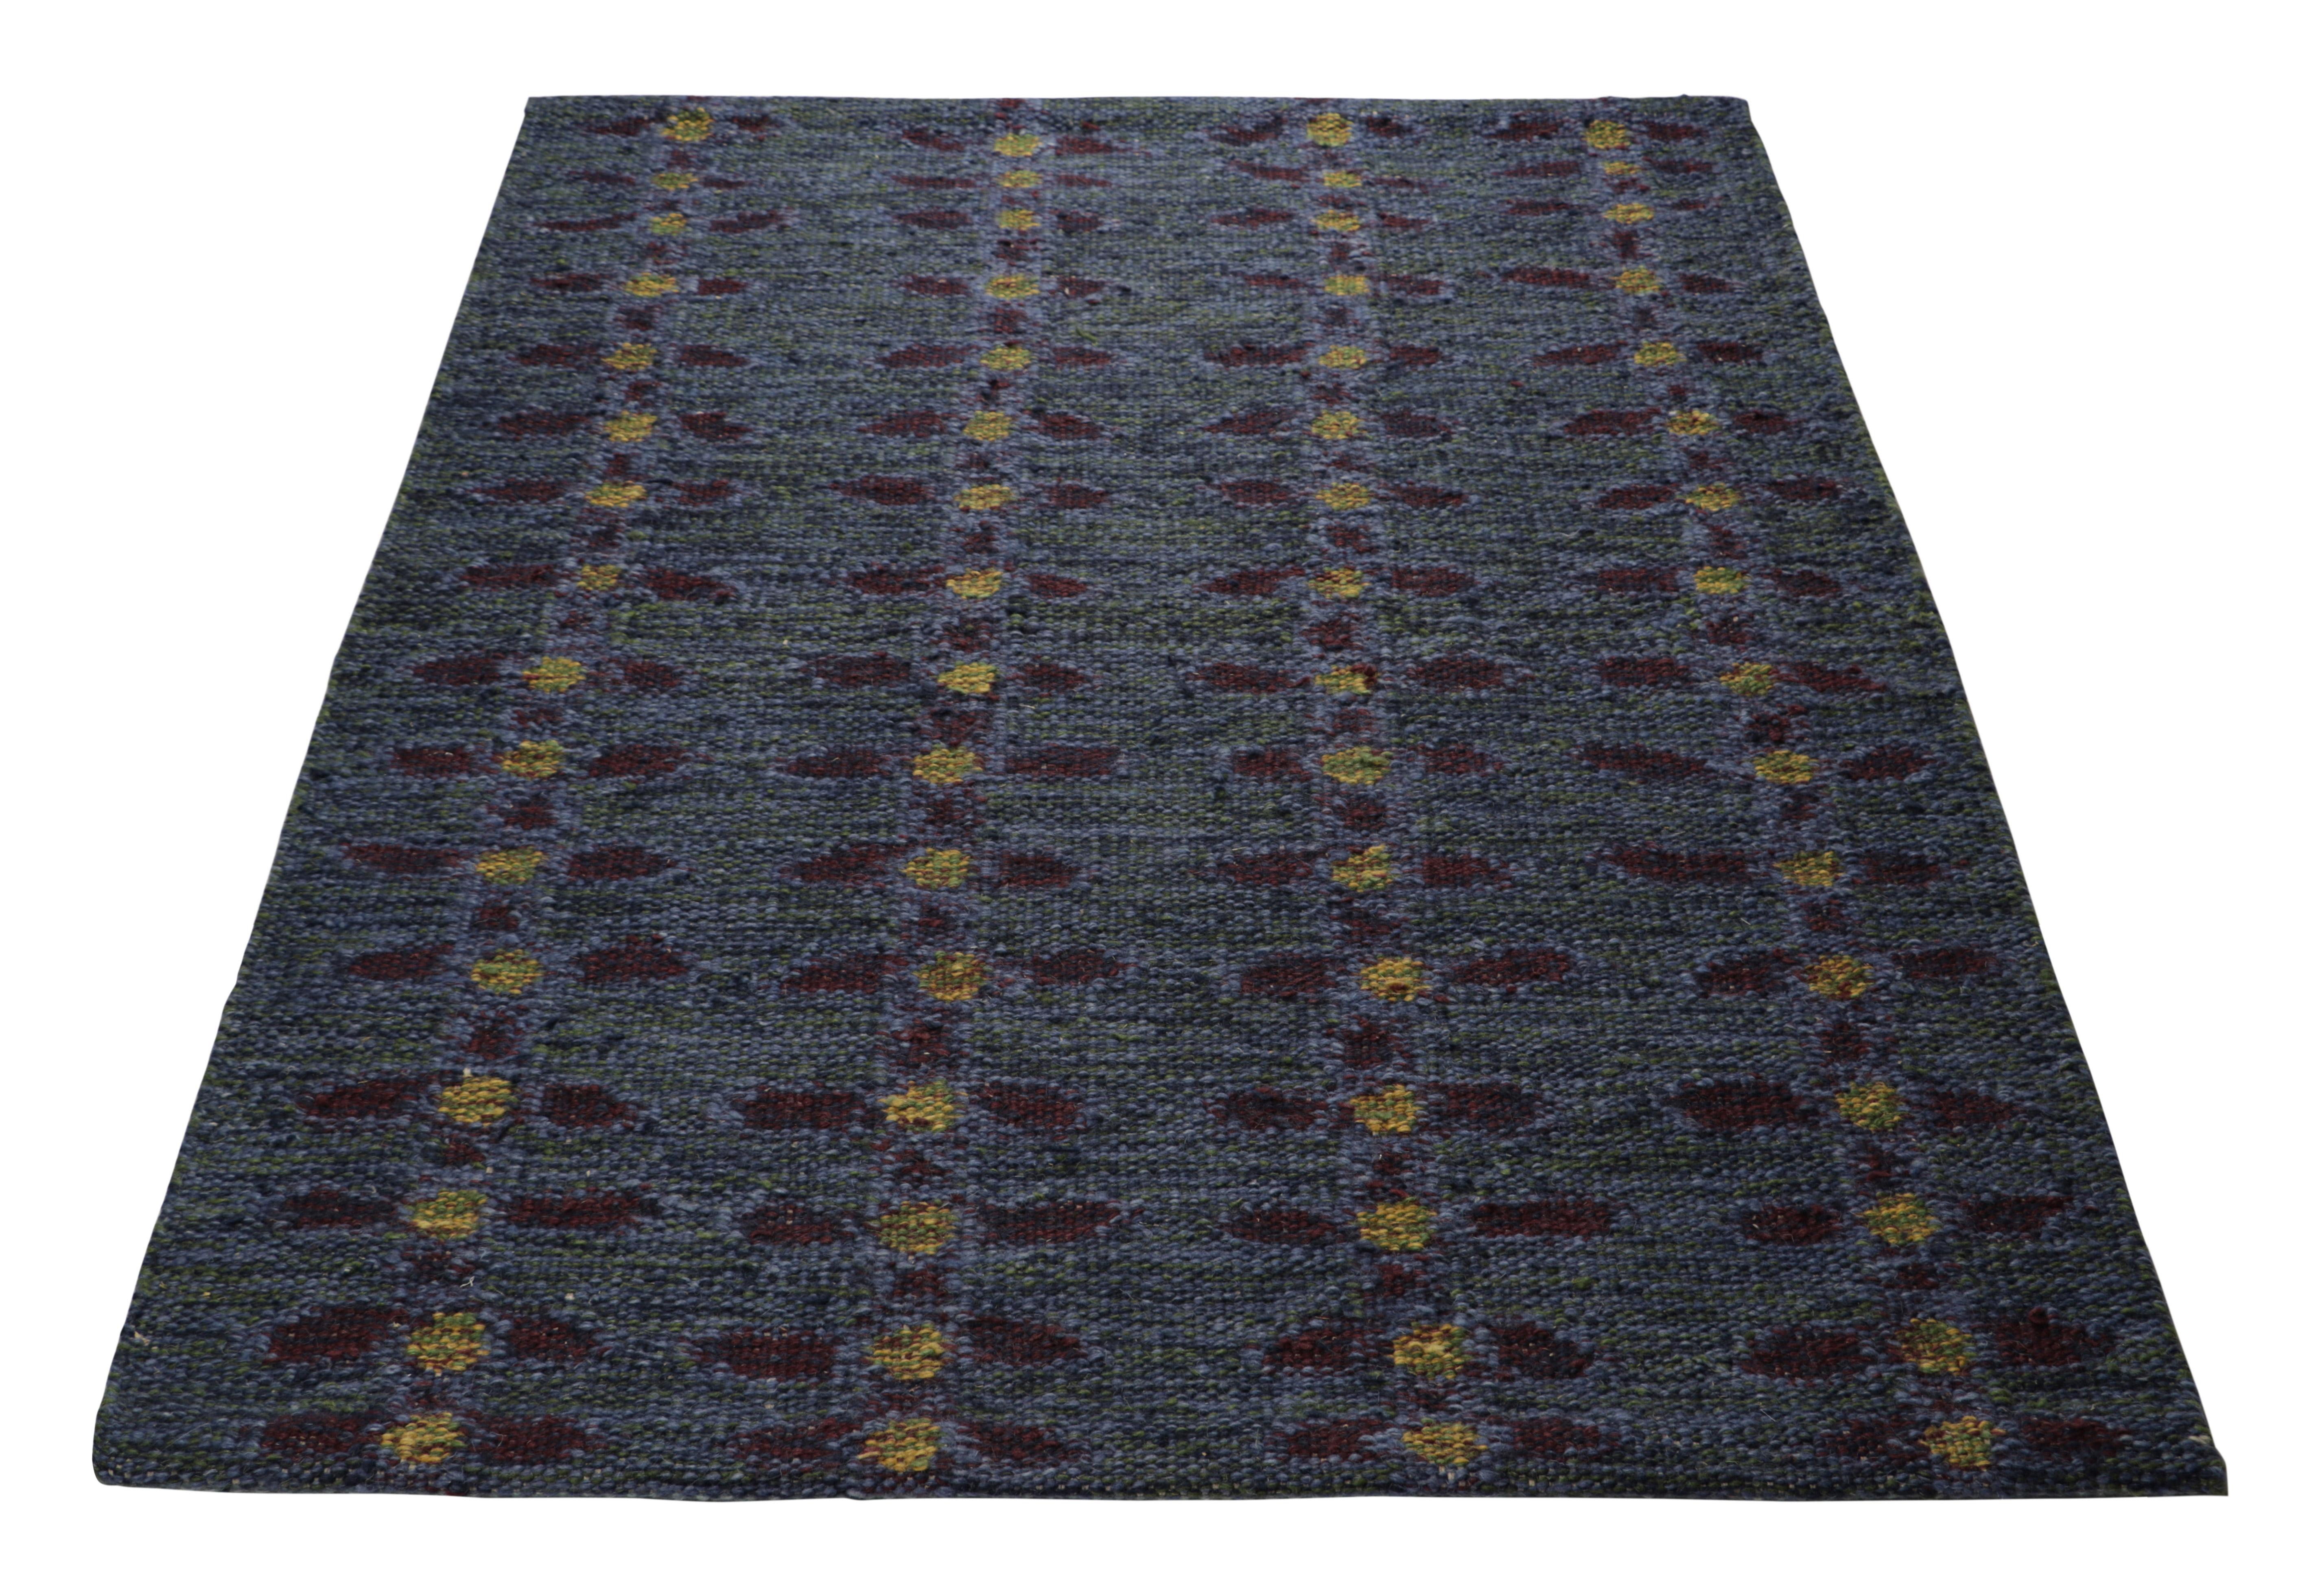 Hand-Woven Rug & Kilim’s Scandinavian Rug in Indigo, with Red and Yellow Floral Patterns For Sale